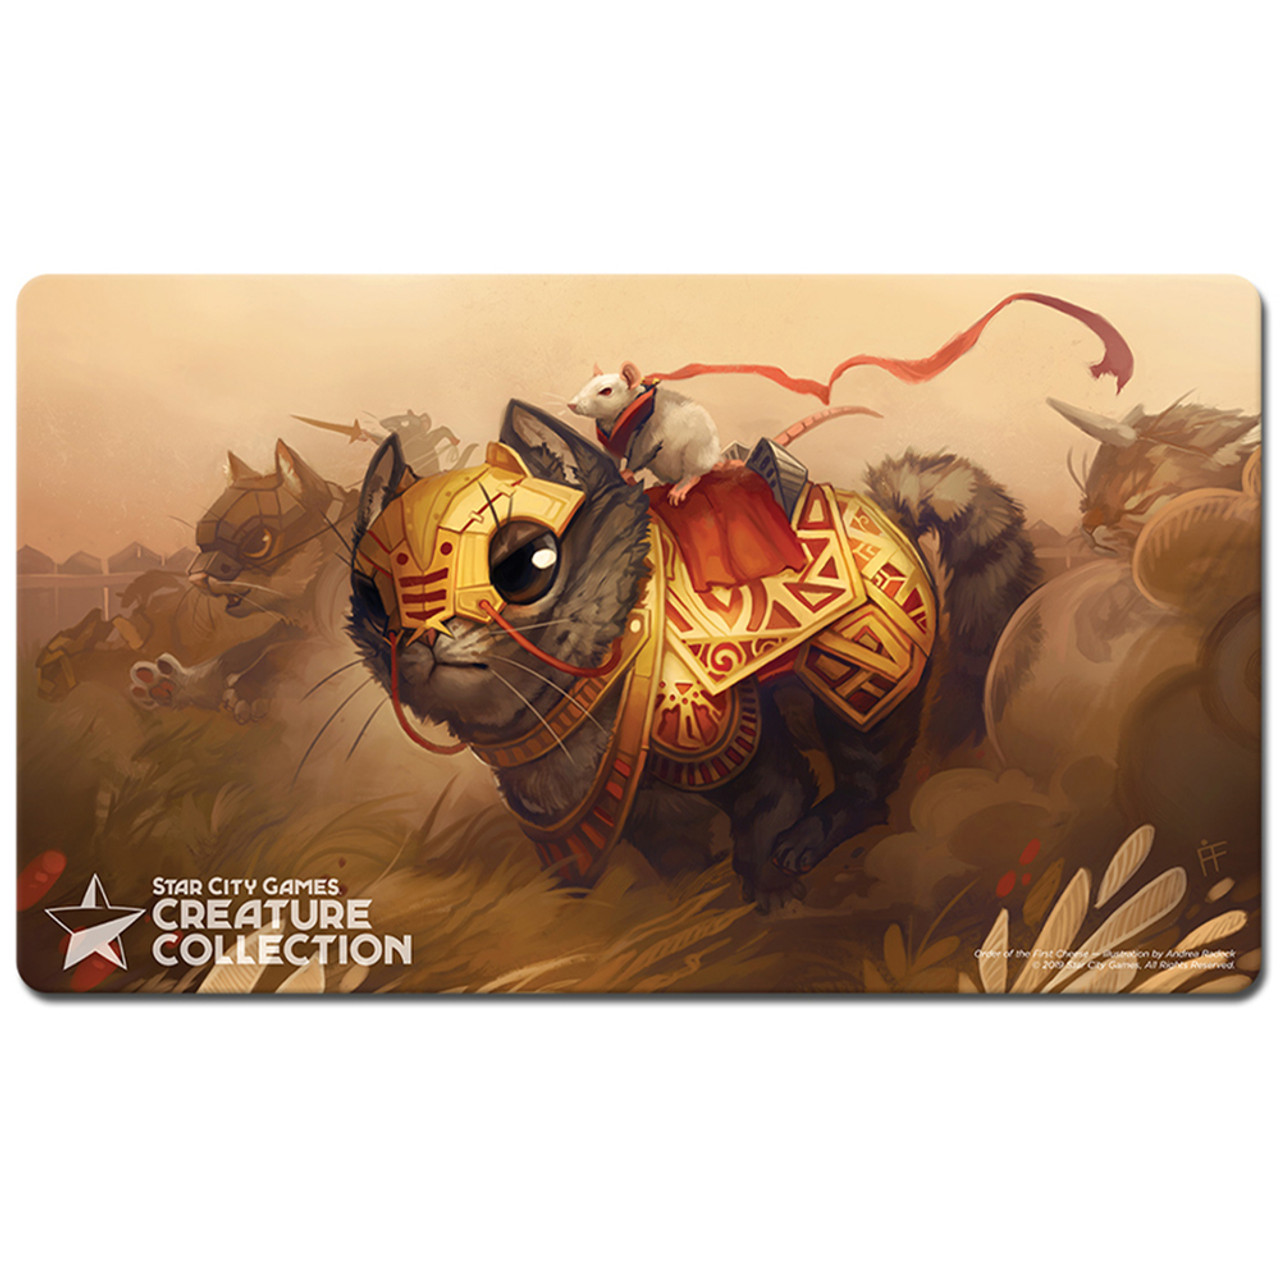 Star City Games Creature Collection Playmat Order of the First Cheese MTG SCG 